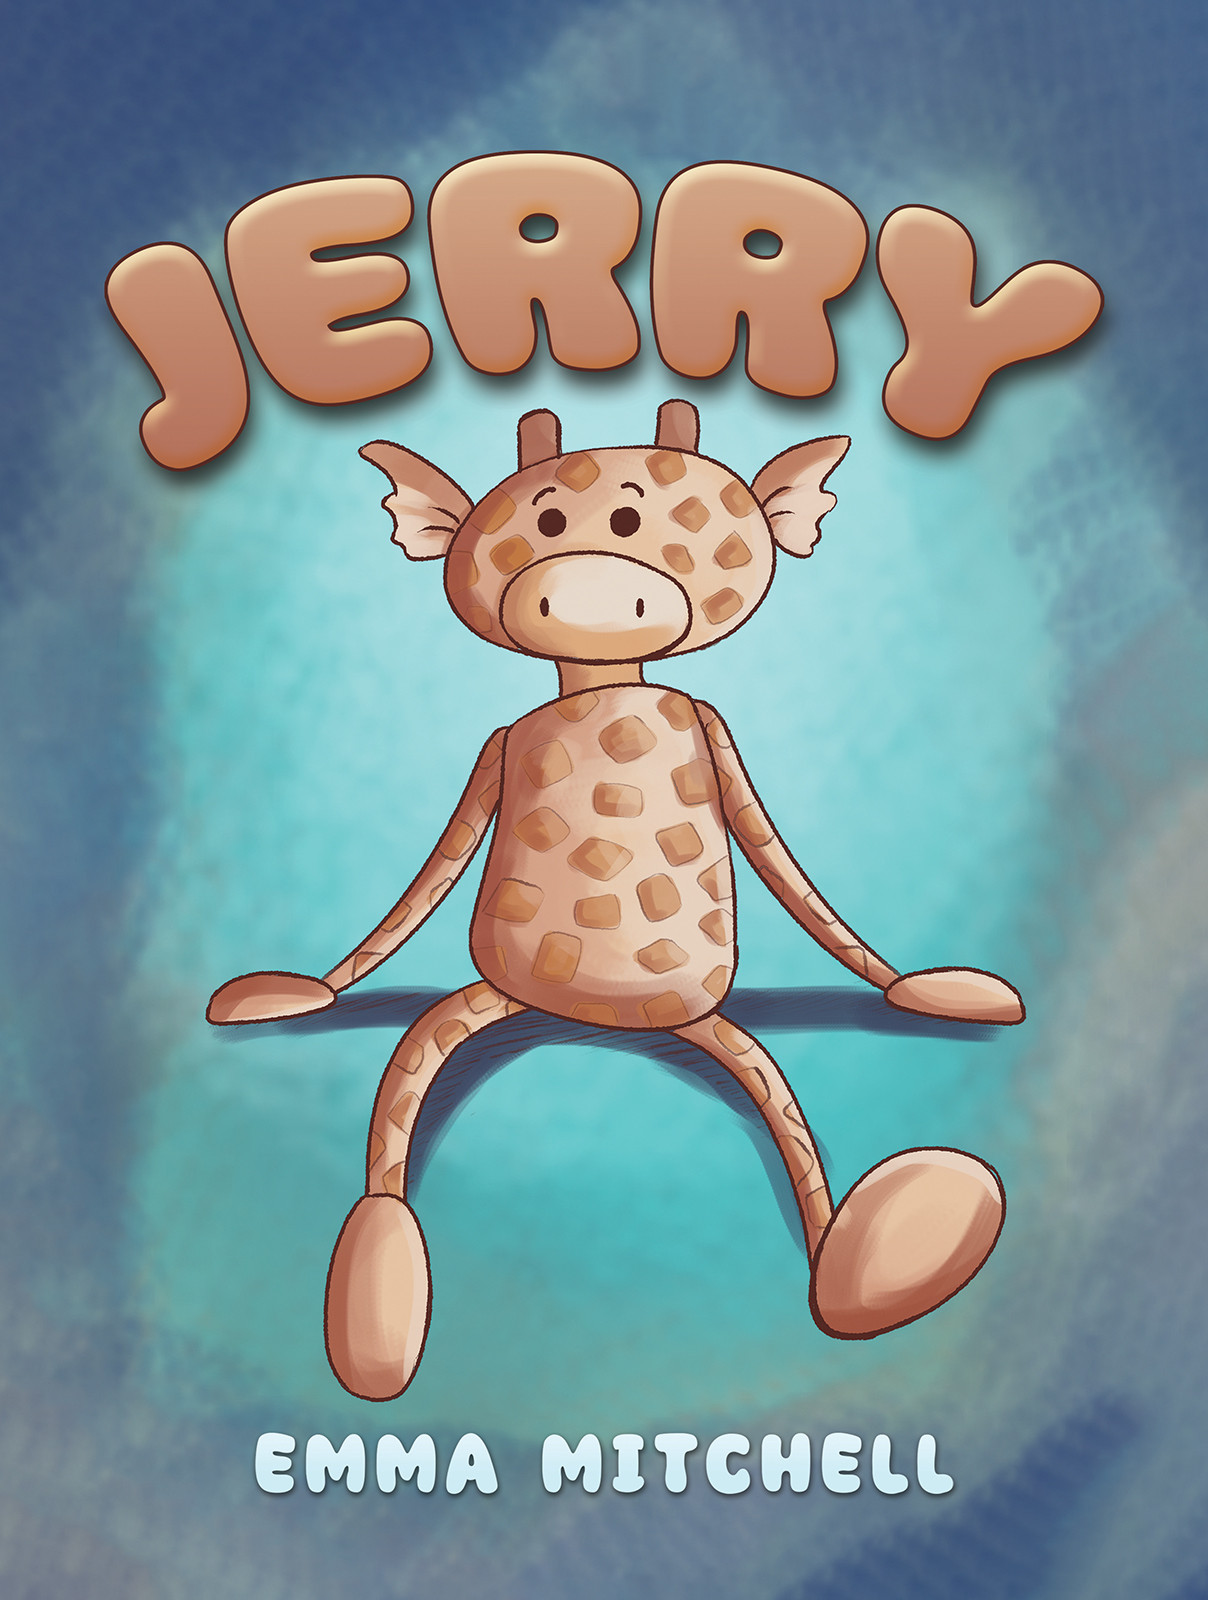 Jerry-bookcover